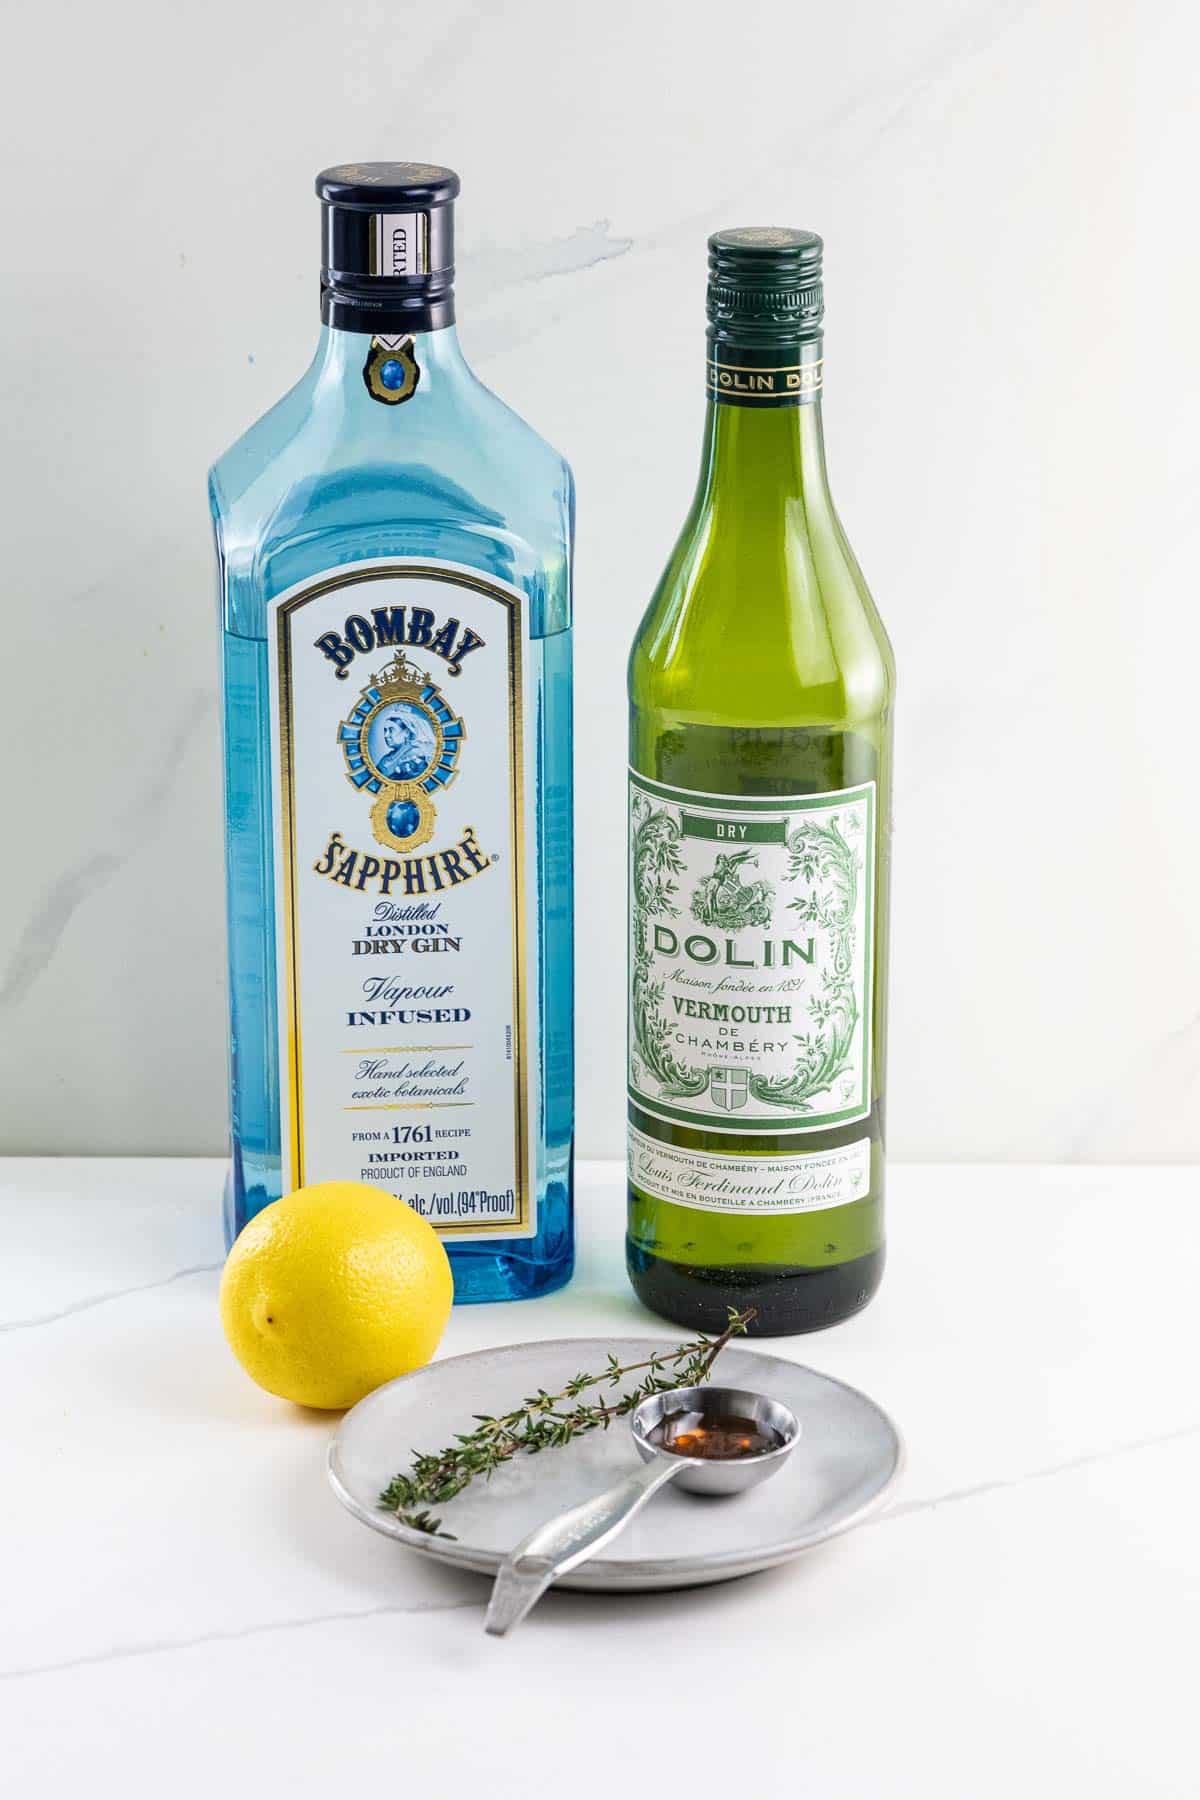 bombay sapphire gin, dolin dry vermouth, a lemon, a thyme sprig, and some honey